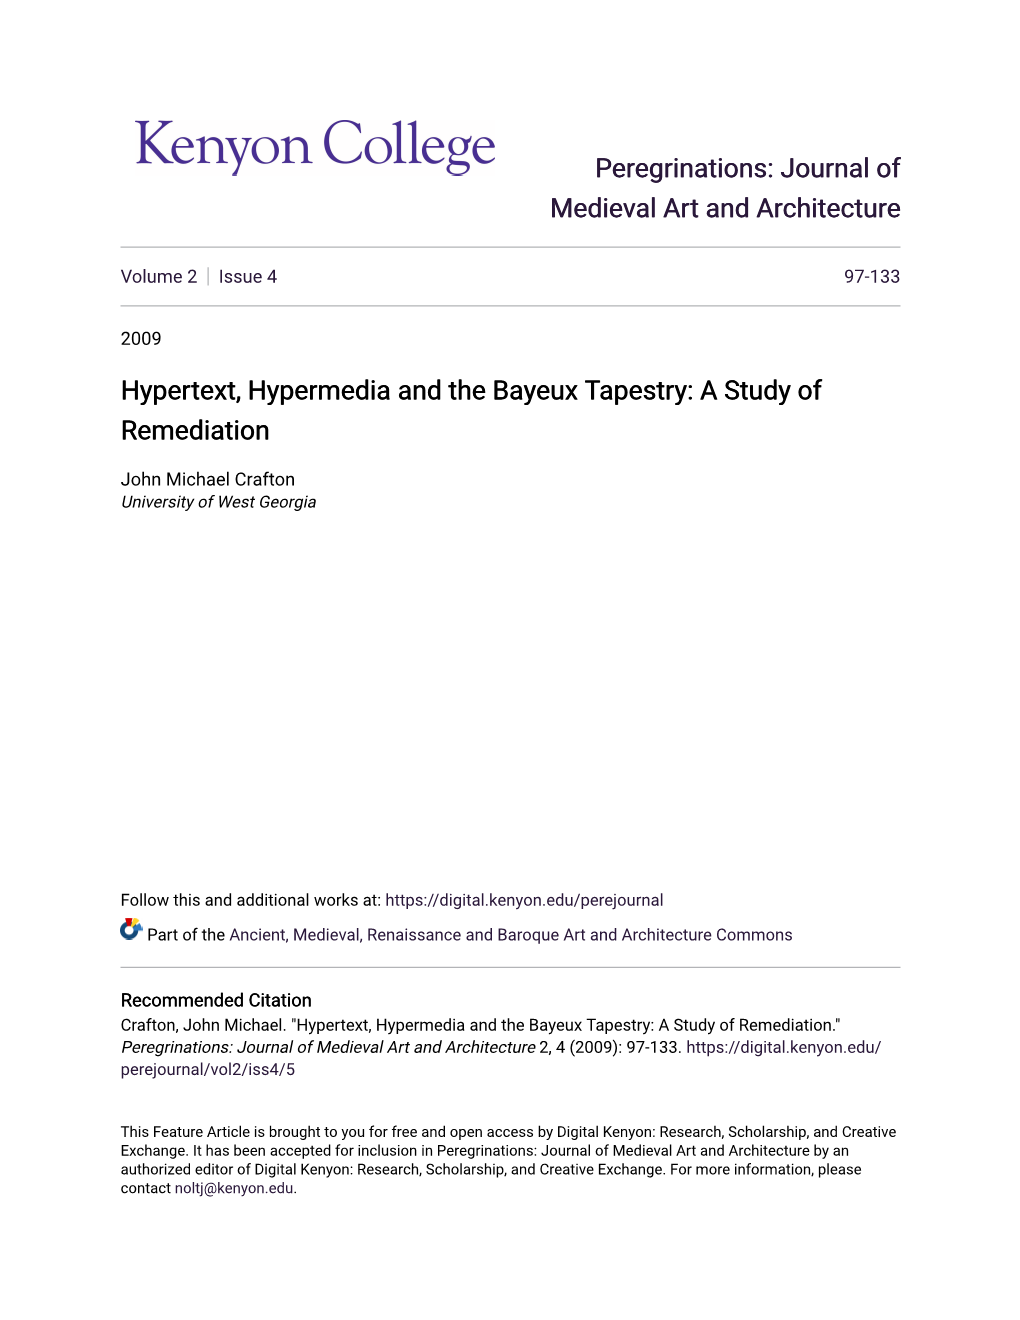 Hypertext, Hypermedia and the Bayeux Tapestry: a Study of Remediation